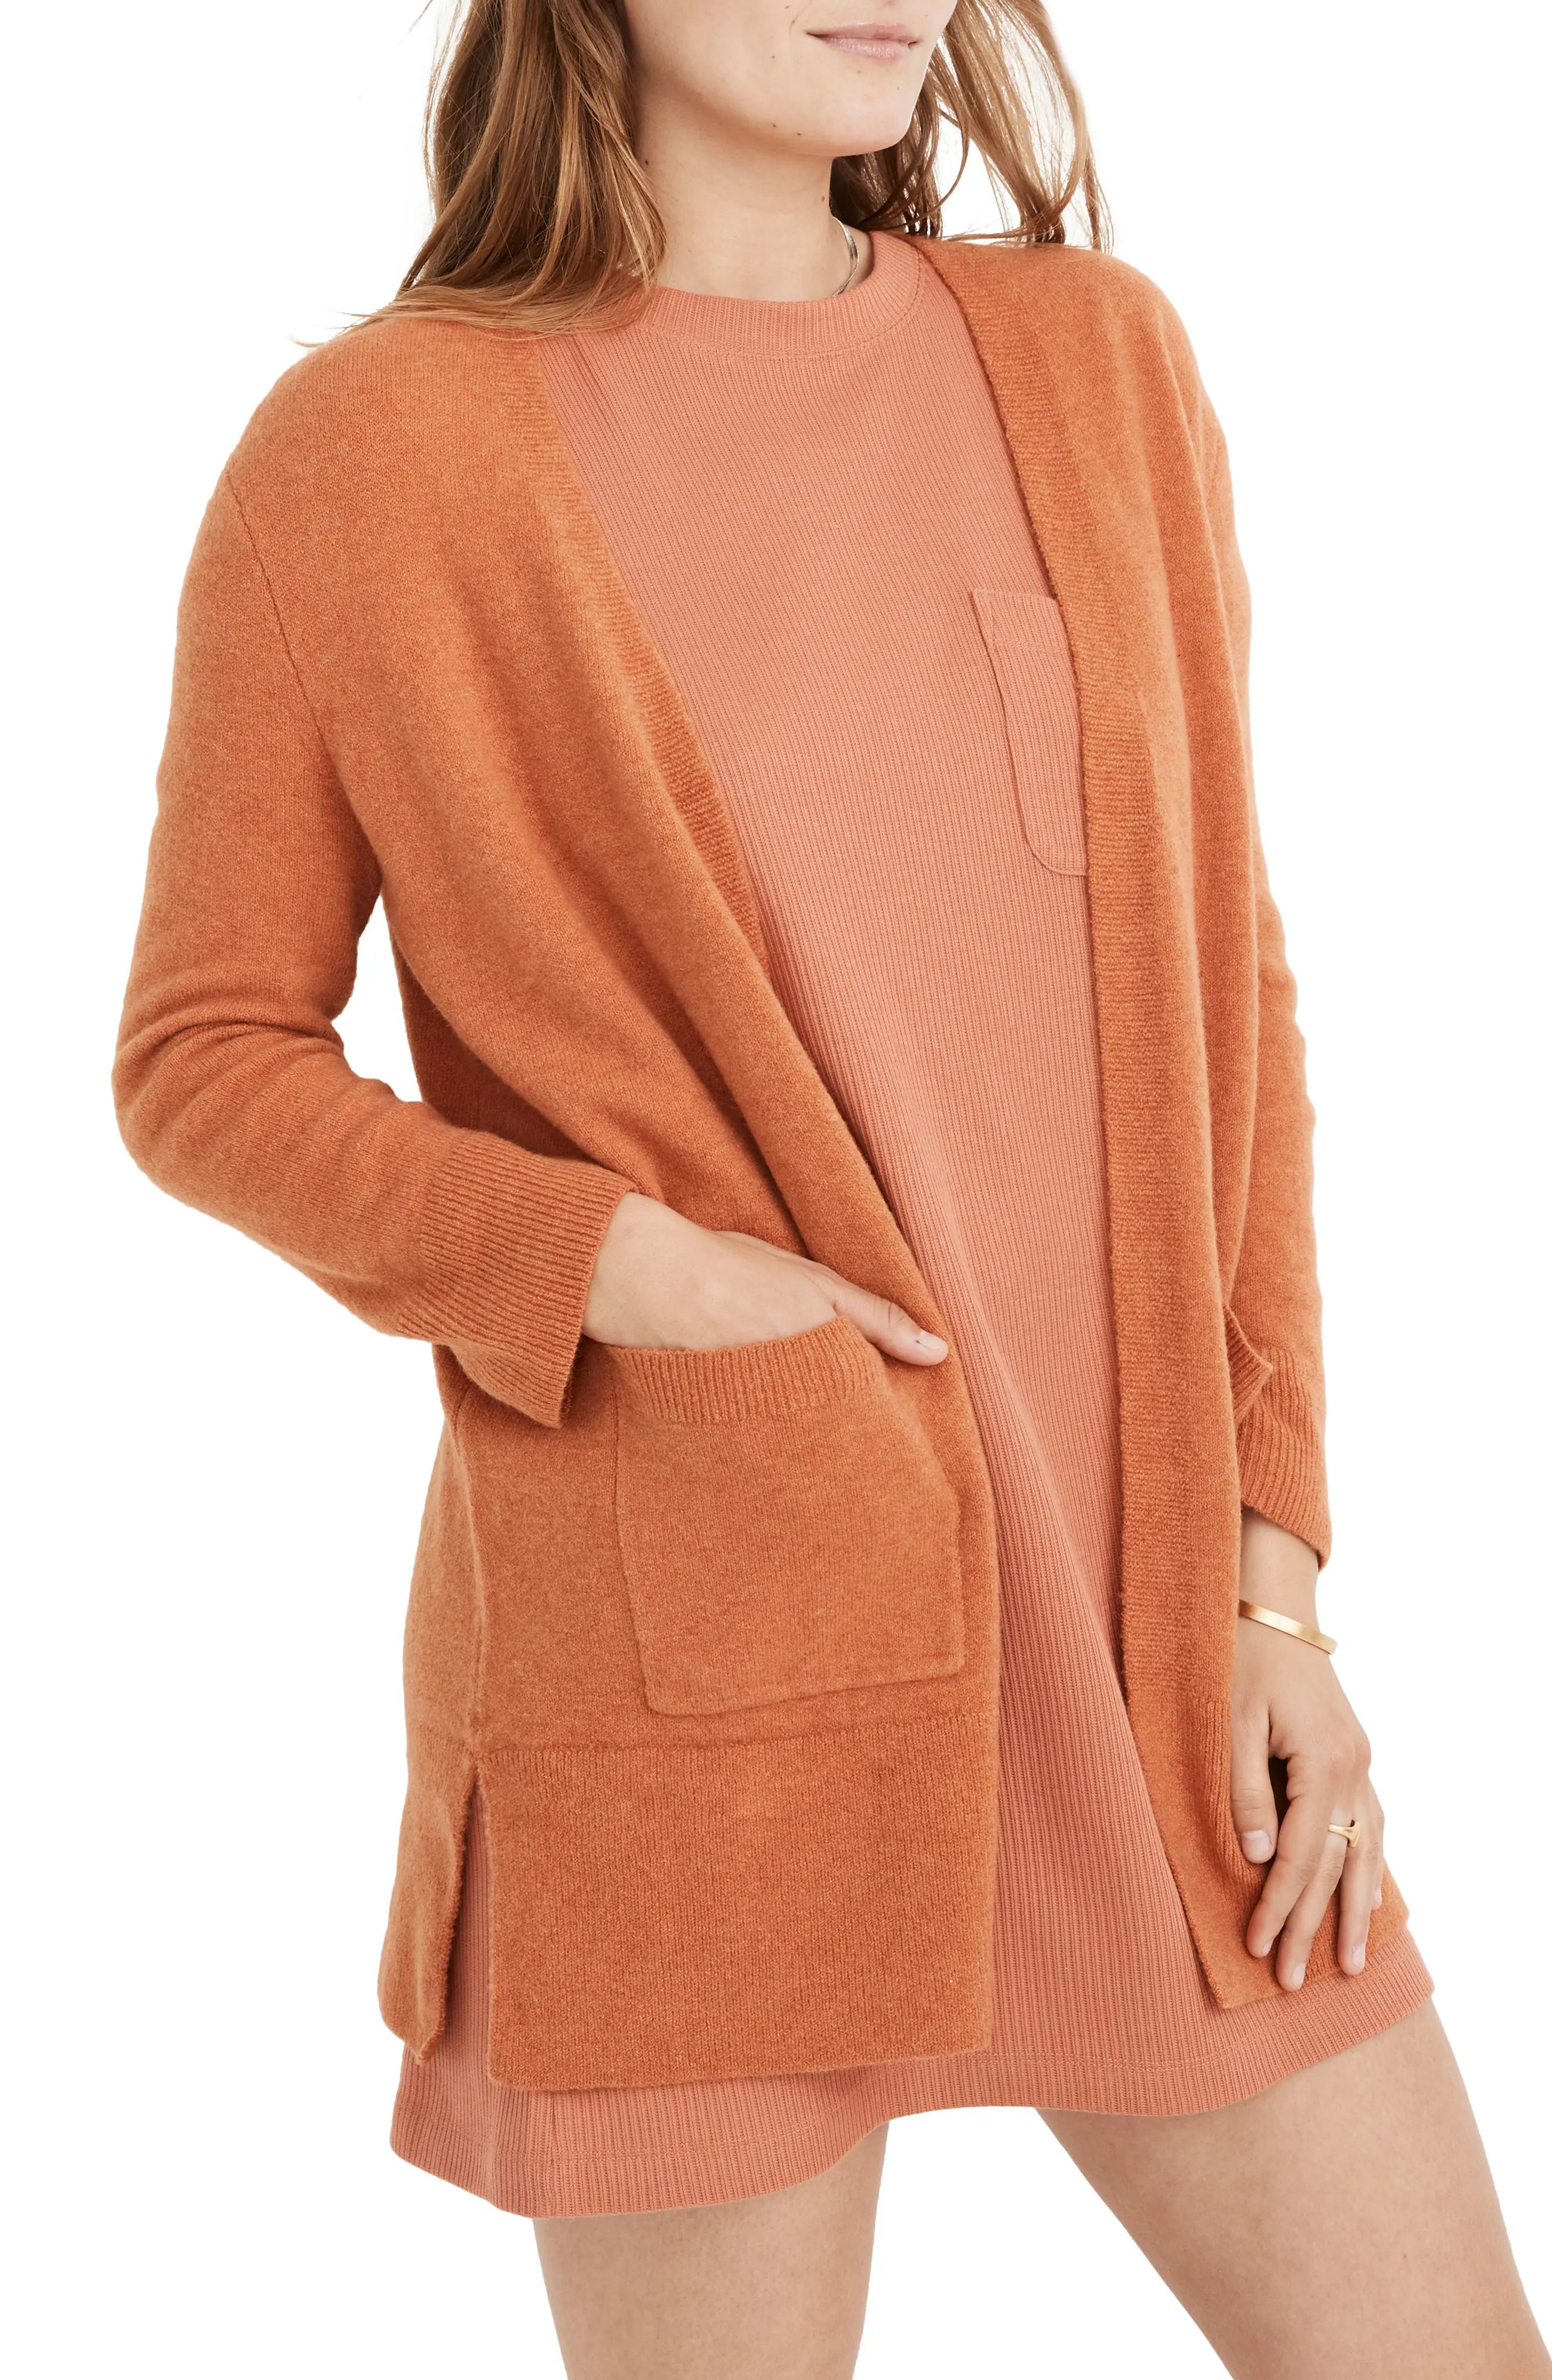 Madewell Kent Cardigan Sweater, Size Medium in Heather Bonfire at Nordstrom | Nordstrom